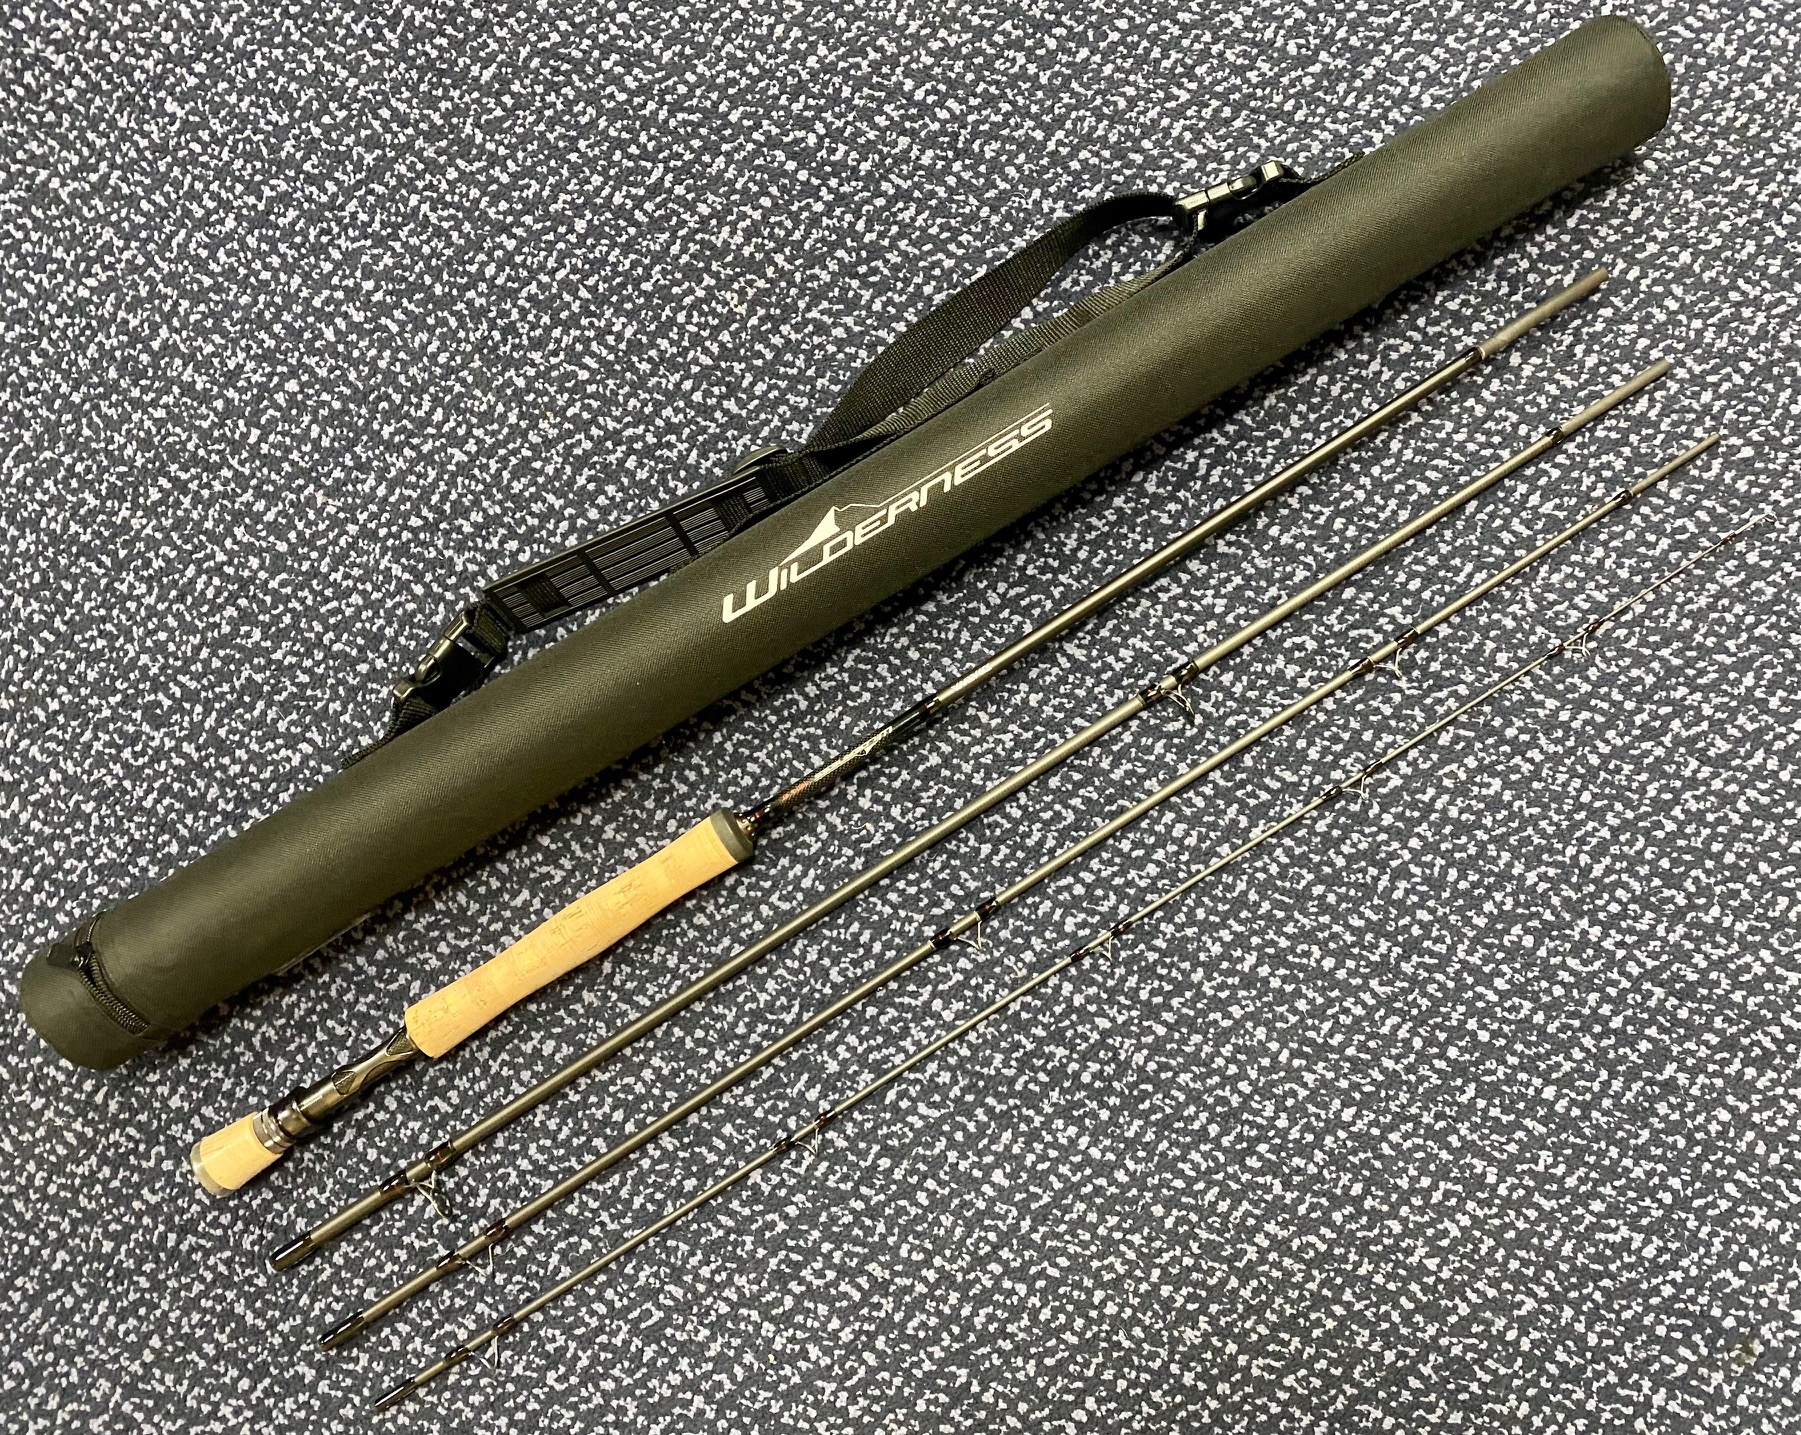 Preloved Daiwa Wilderness Fly 10ft #7 4pc (in tube) - Excellent – Glasgow  Angling Centre